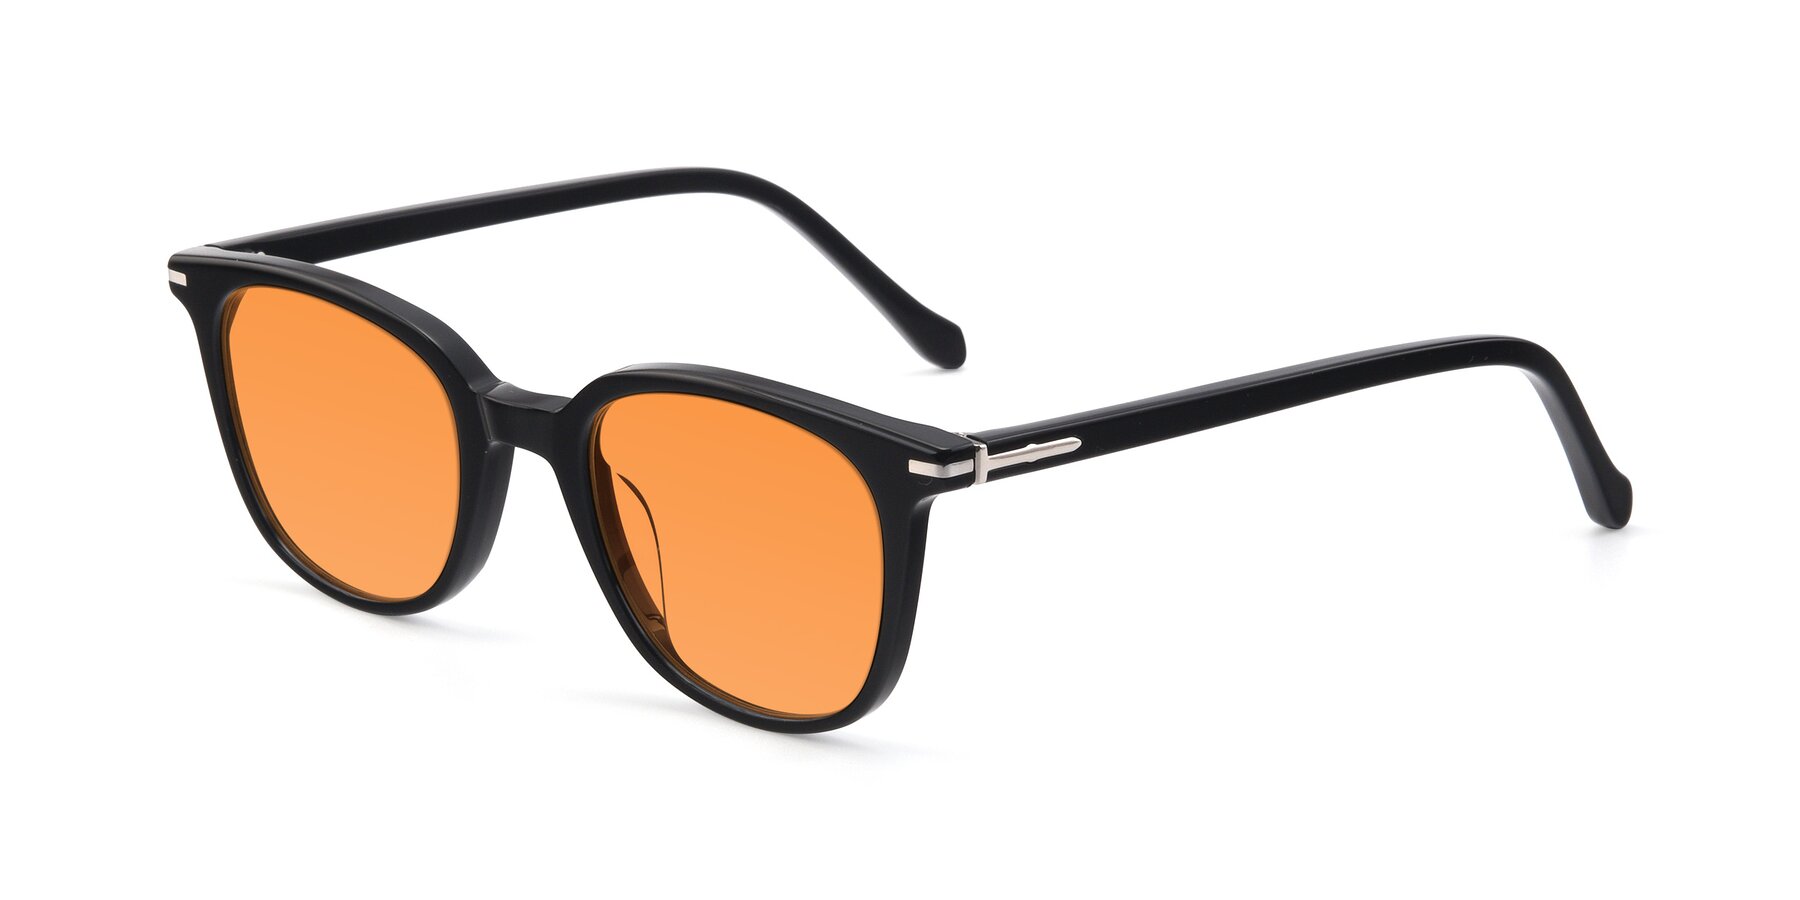 Angle of 17562 in Black with Orange Tinted Lenses